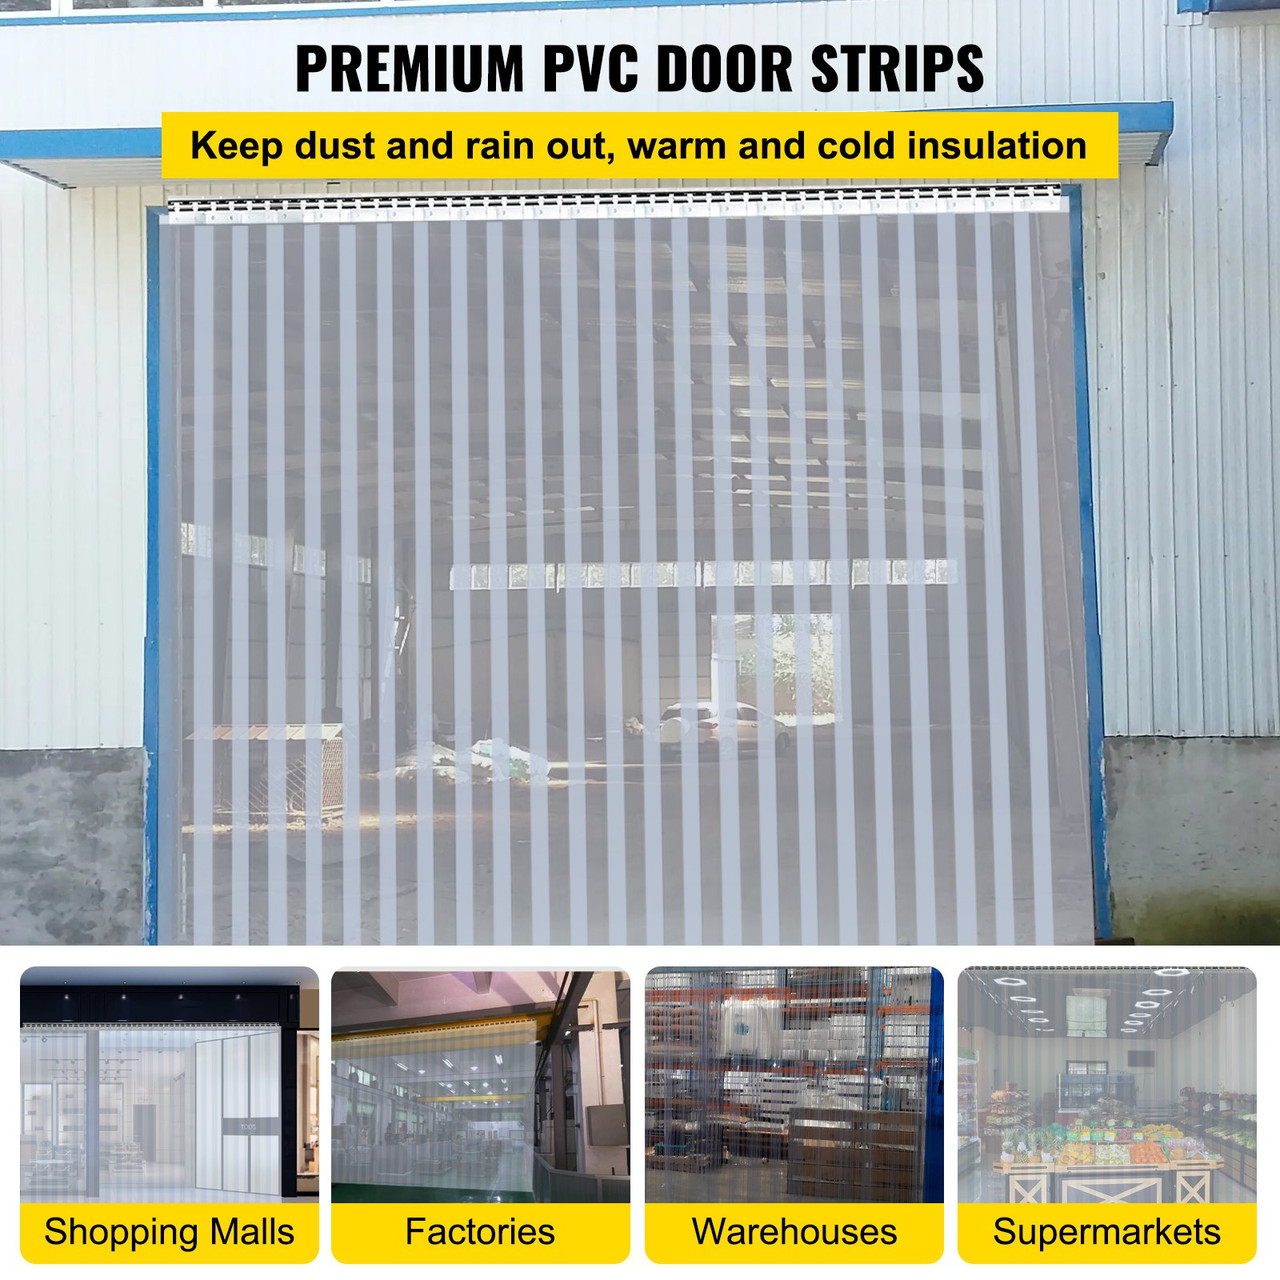 15PCS Plastic Curtain Strips, 60Inch (5ft) Width X 84Inch (7ft) Height PVC Strip Door Curtain, 0.08 Inch Thickness Vinyl Strip Door Curtain 50% Overlap for Doors